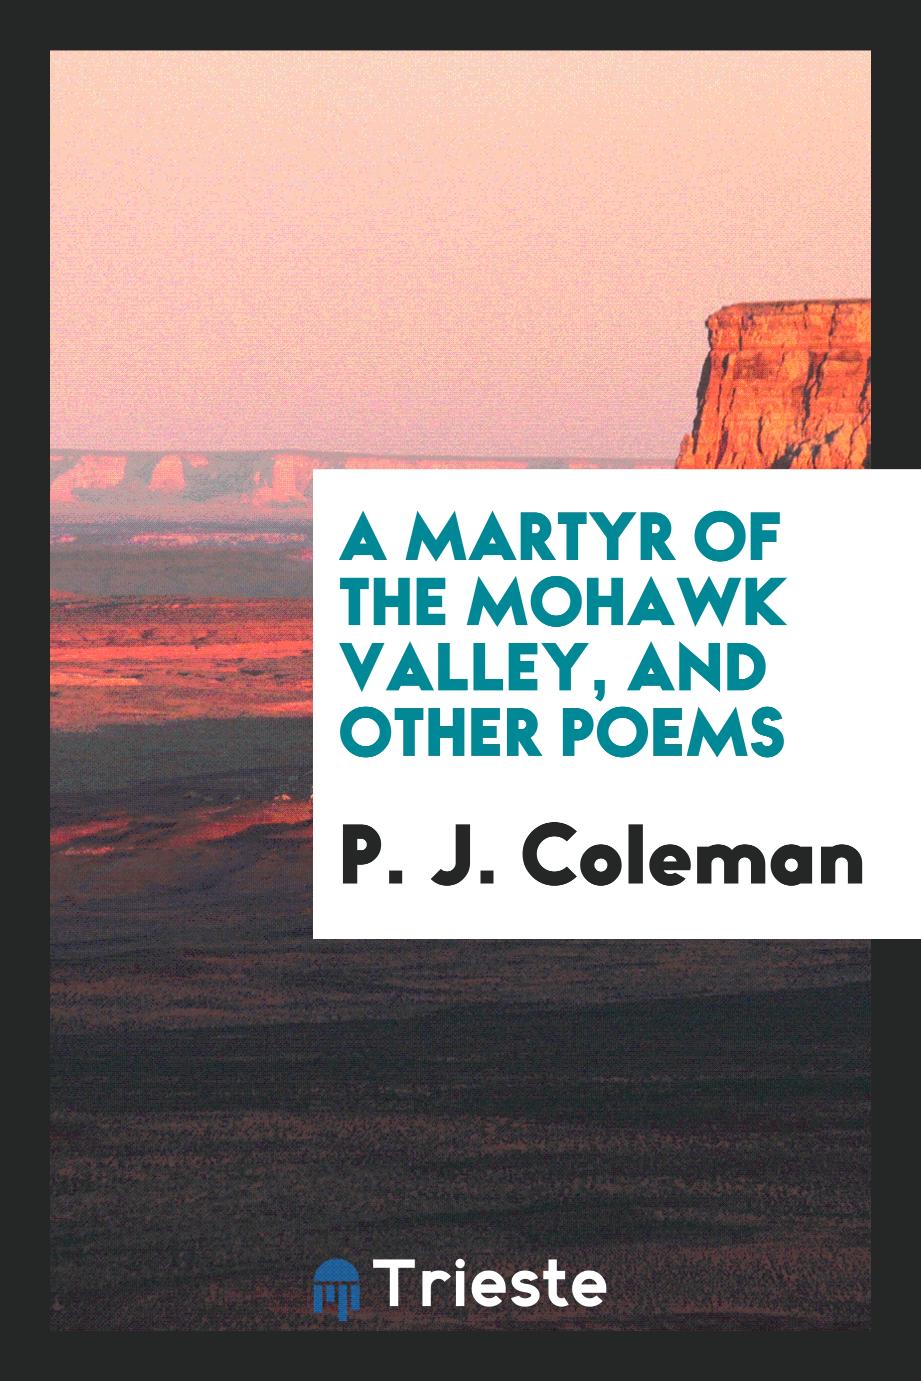 A Martyr of the Mohawk Valley, and Other Poems